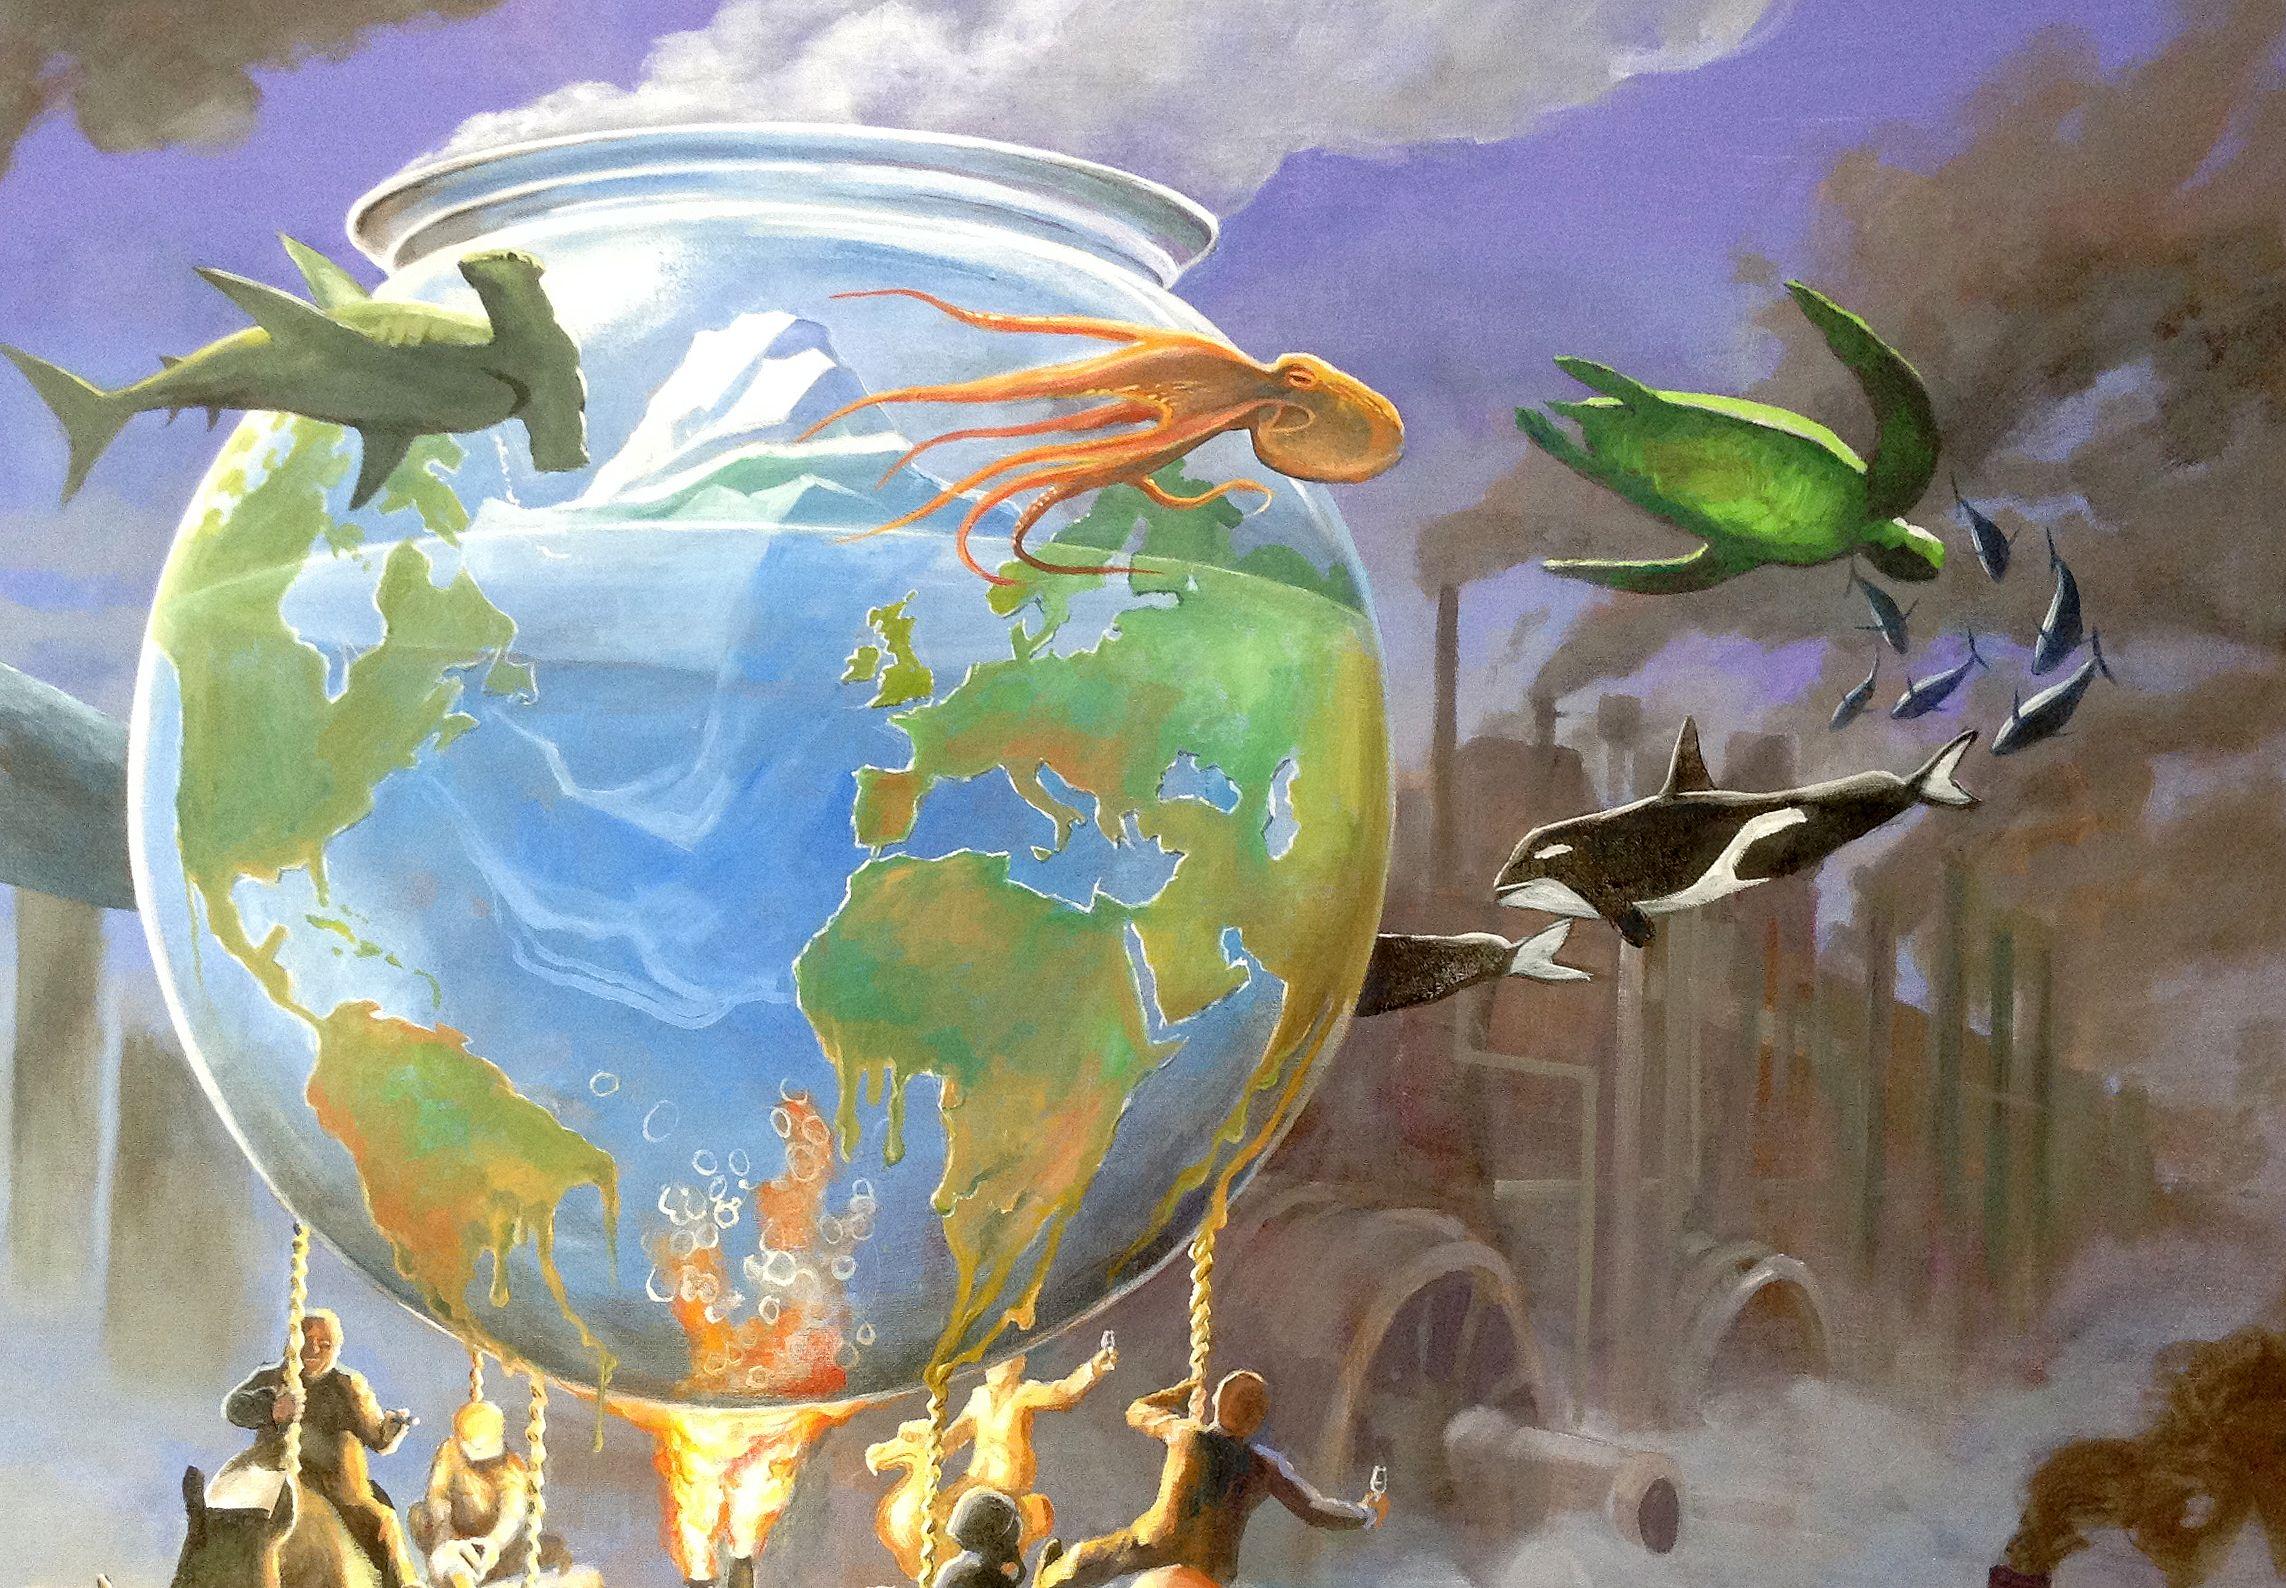 A symbolic depiction of global warming. Using one of my favourite icons, the goldfish bowl, to represent a fragile ecology heated up by the reckless industrialised burning of the greedy capitalists. The landscape is broken and shadowed by clouds in